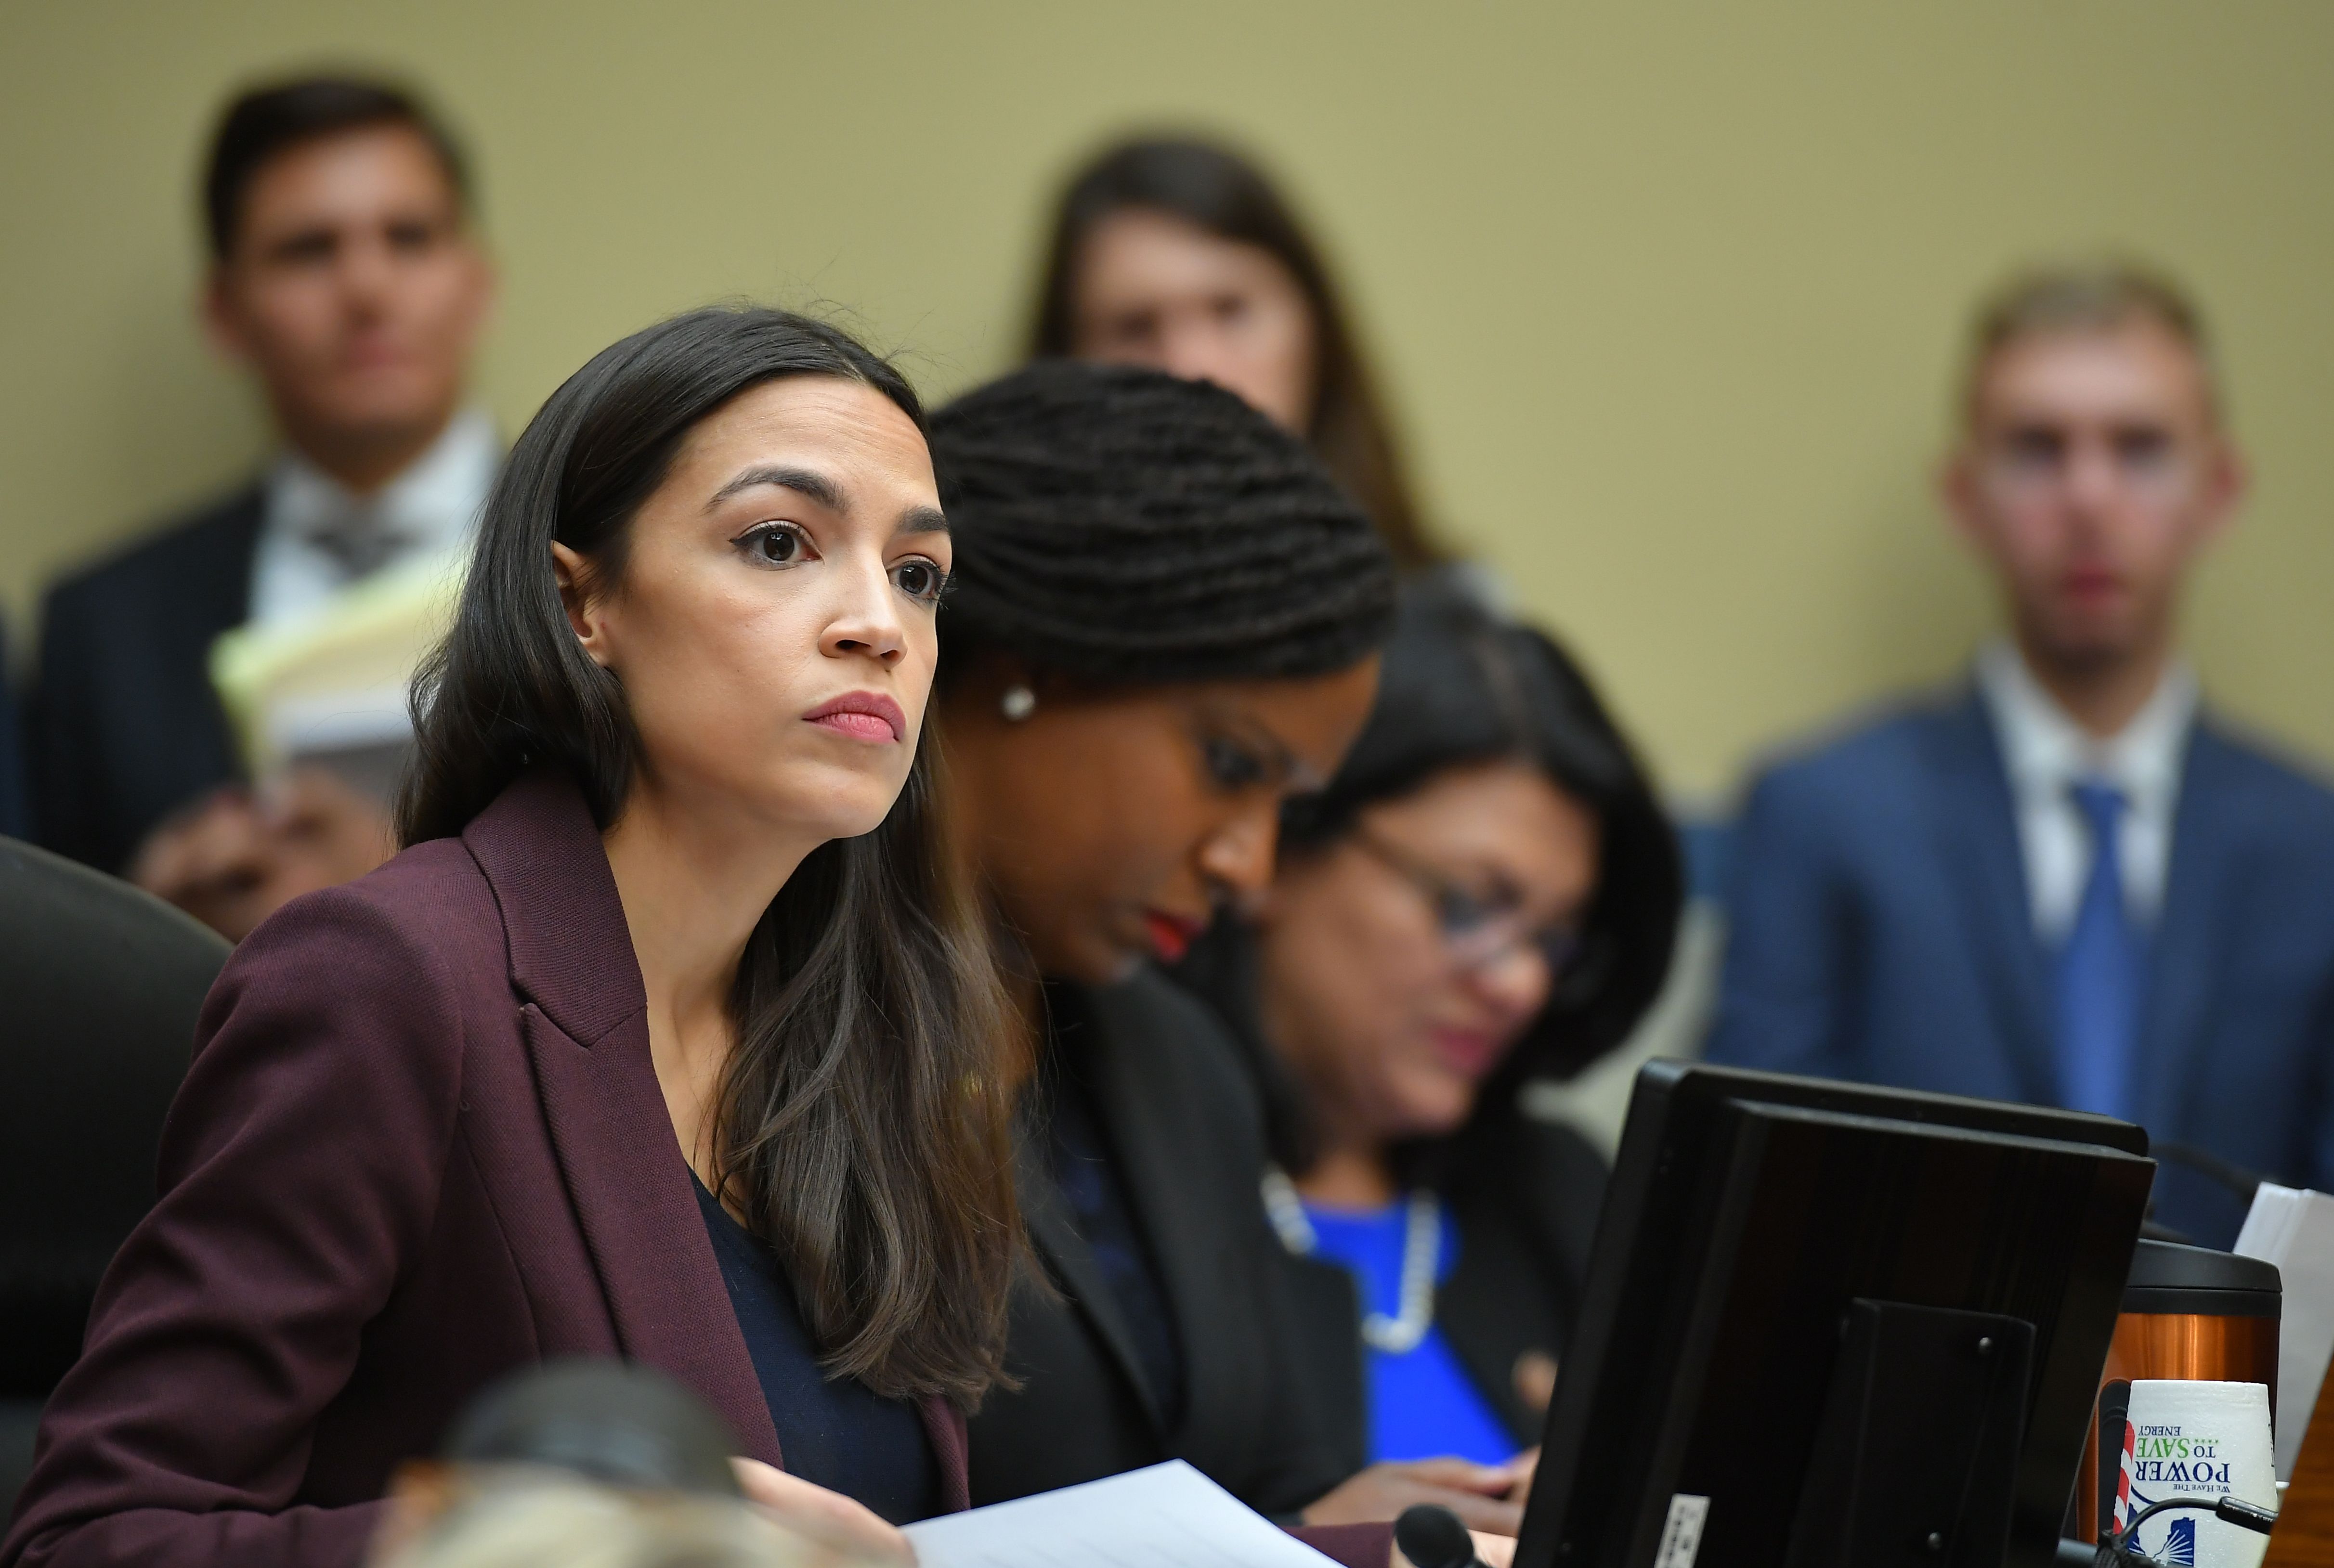 U.S. Rep. Alexandria Ocasio-Cortez(D-NY) listens as Michael Cohen testifies before the House Oversight and Reform Committee on February 27, 2019. (Mandel Ngan/AFP/Getty Images)